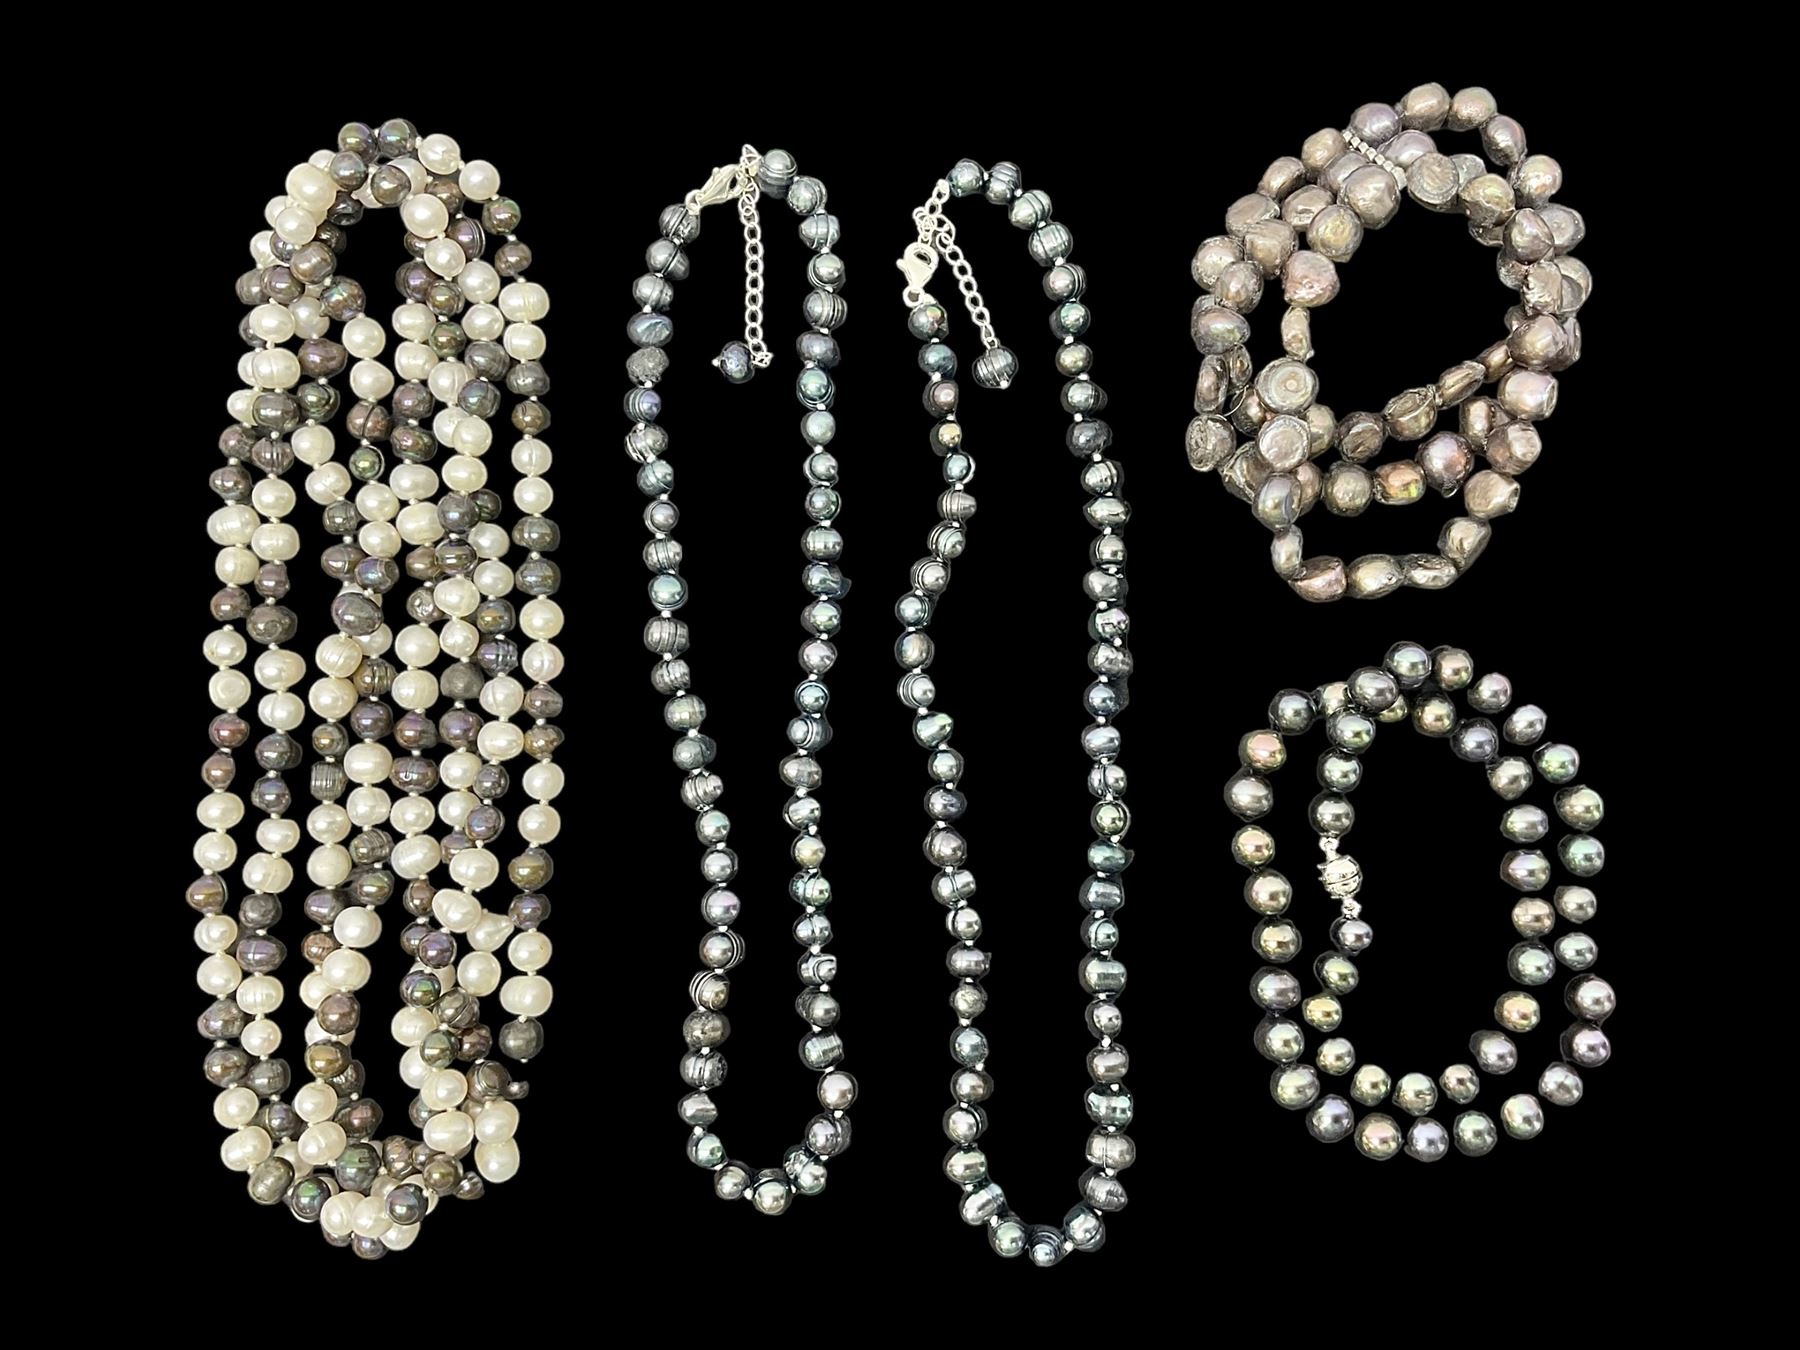 Four fresh water pearl necklaces - Image 34 of 77